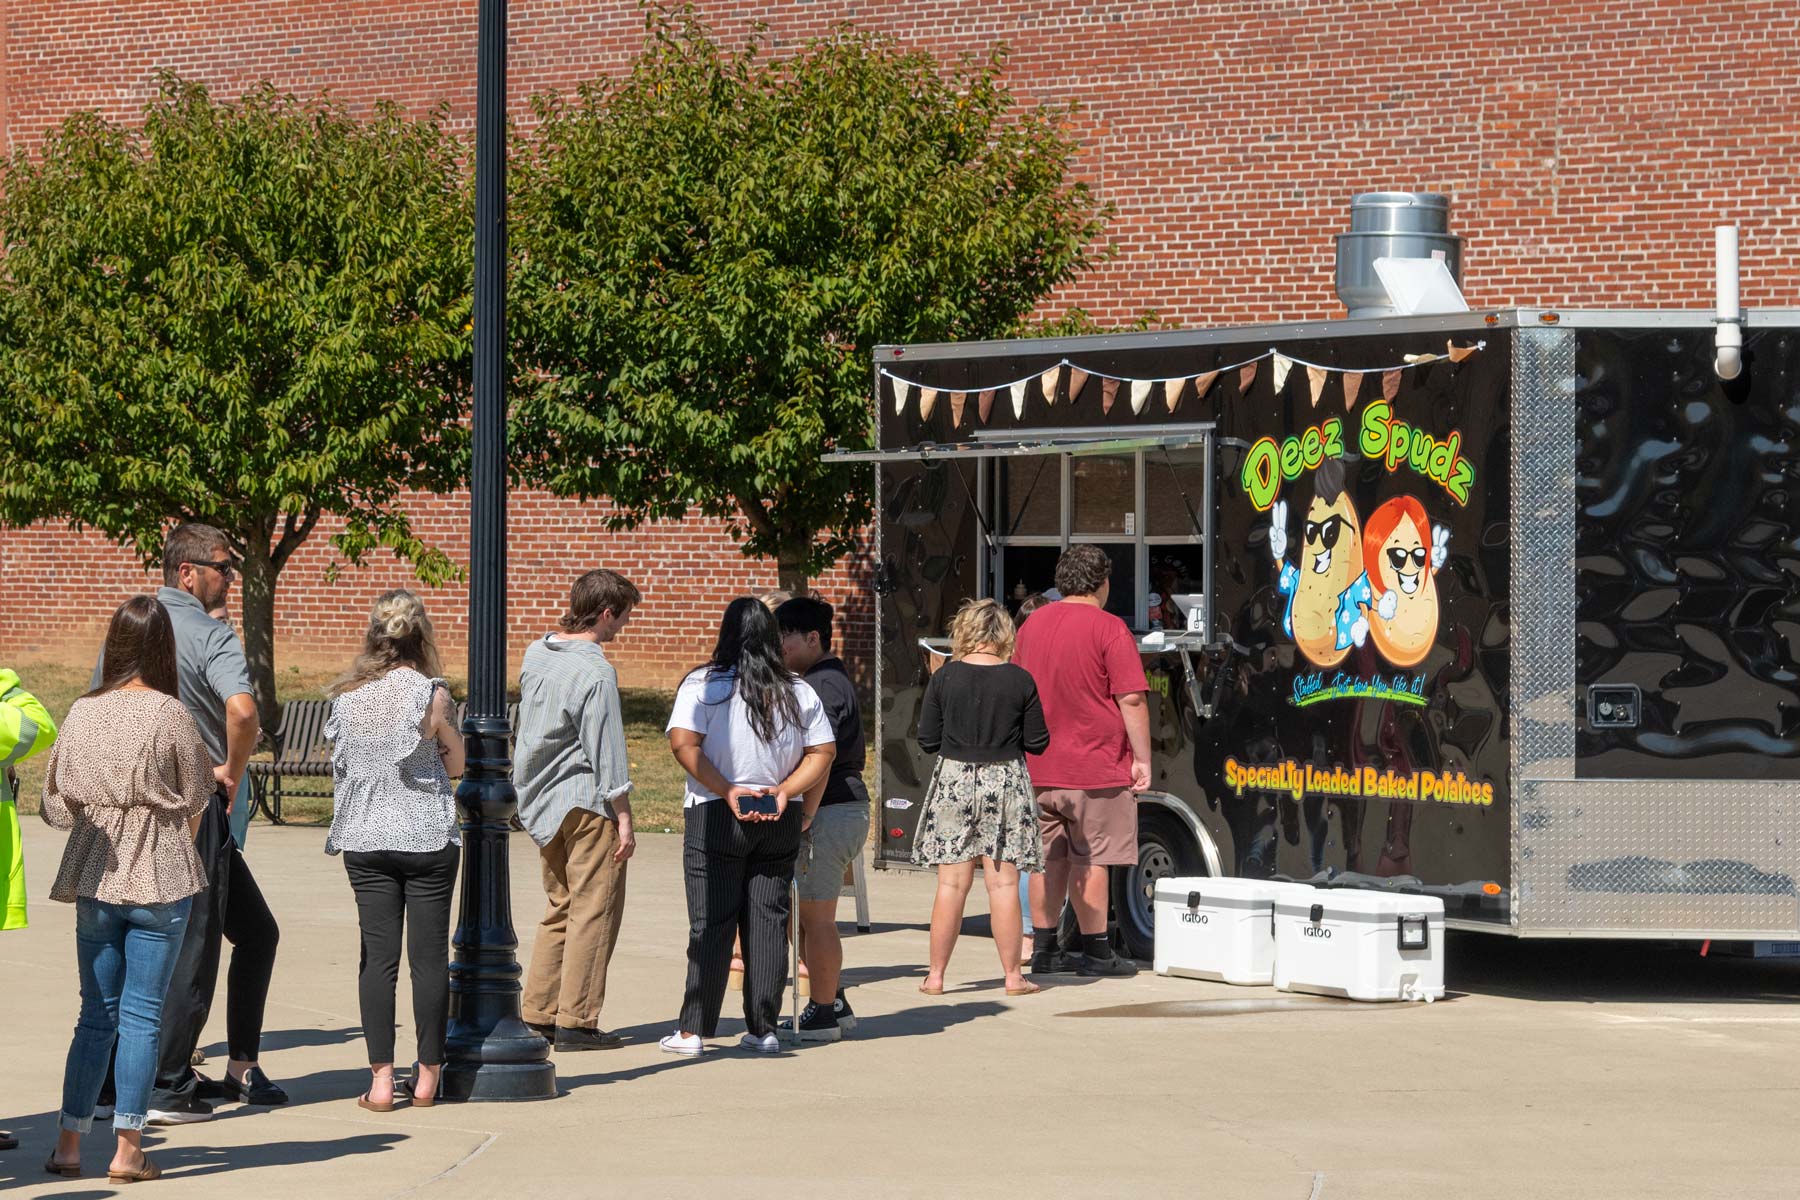 people lined up at a food truck with graphics that say "Deez Spudz"